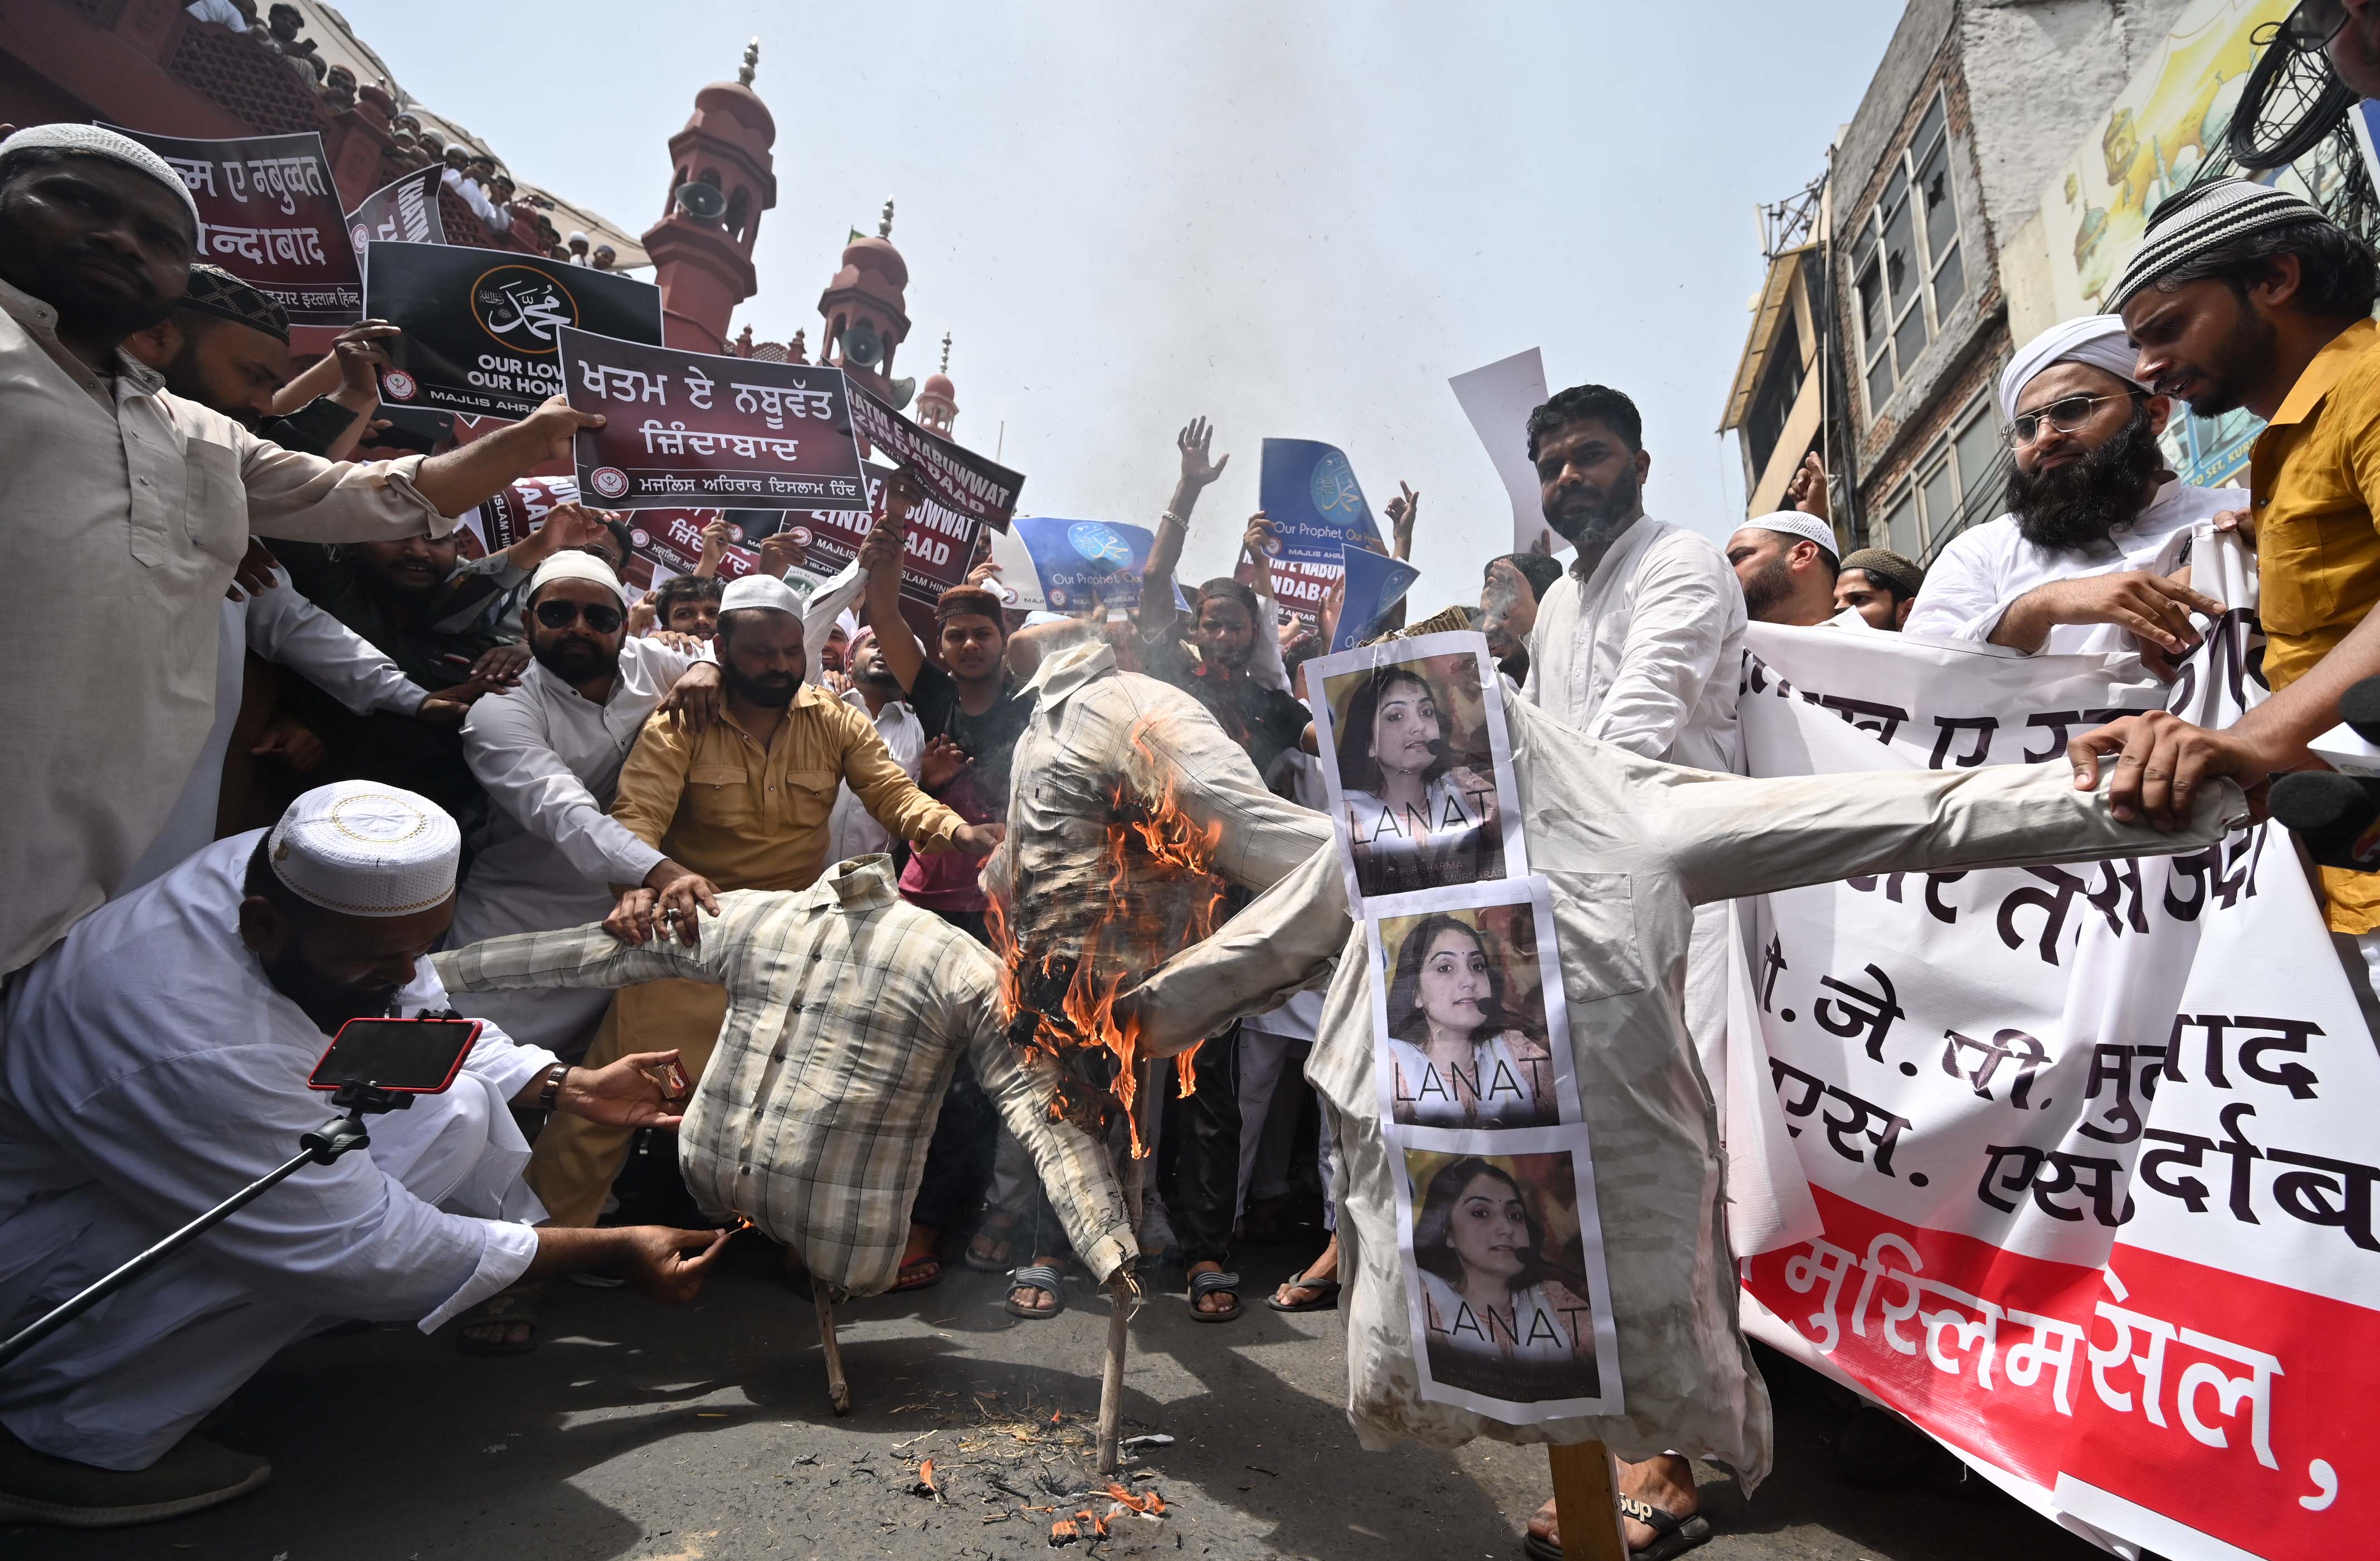 Protests against Nupur Sharma, Naveen Jindal erupt in Ludhiana over remarks on Prophet